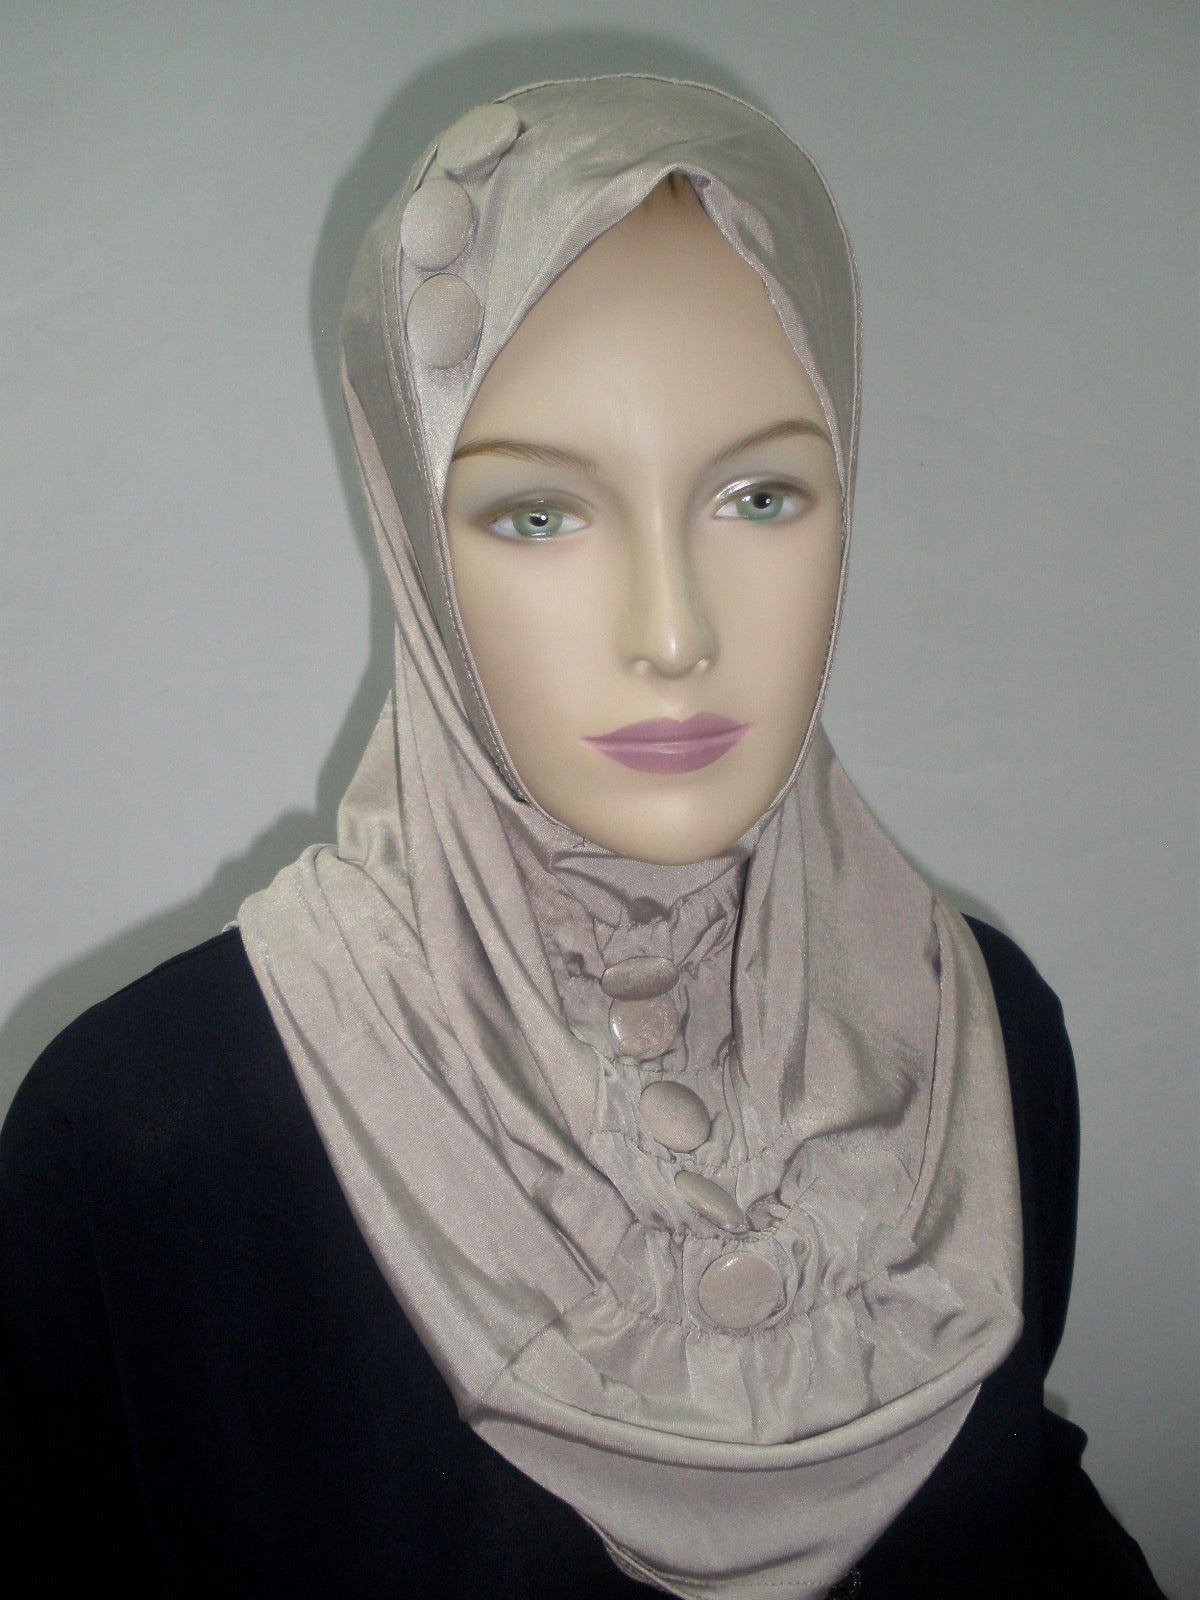 Buttoned Accent One Pc Ameera Hijab